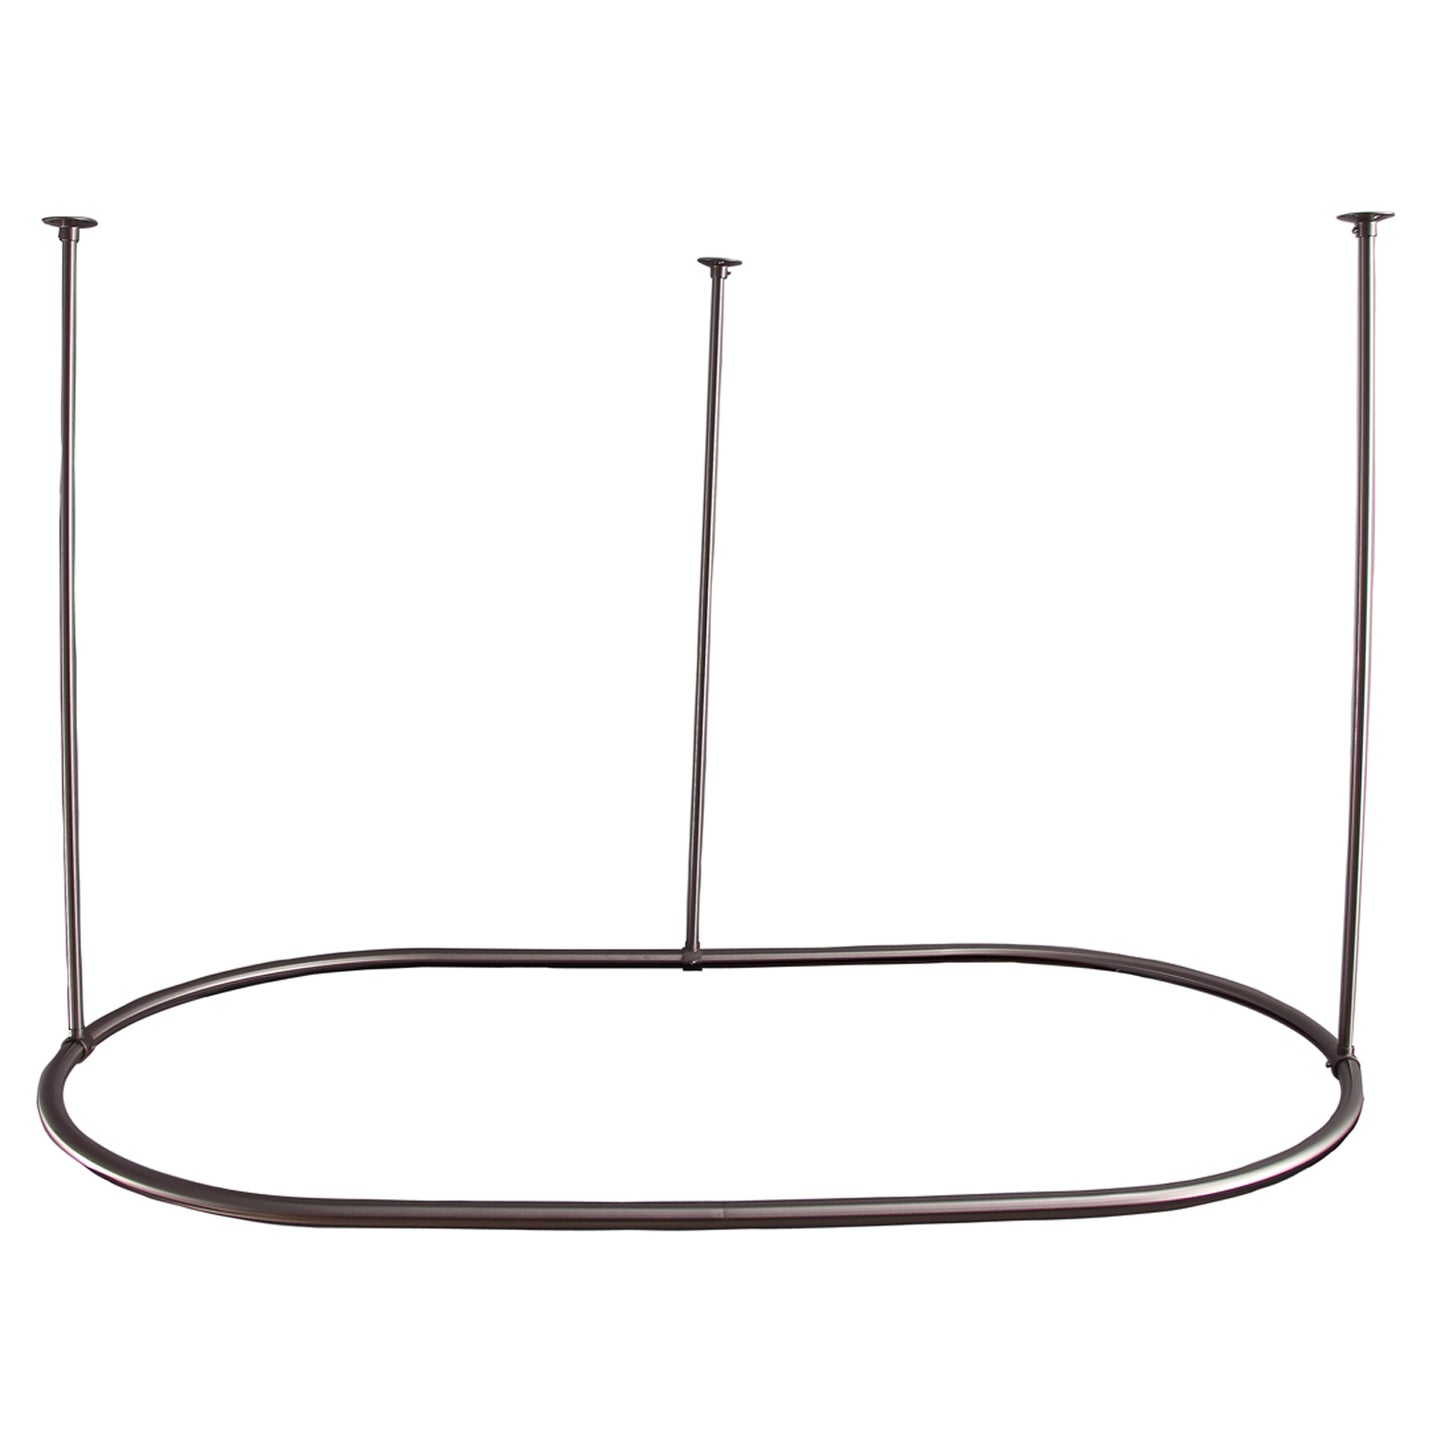 54" x 36" Oval Shower Curtain Ring in Brushed Nickel